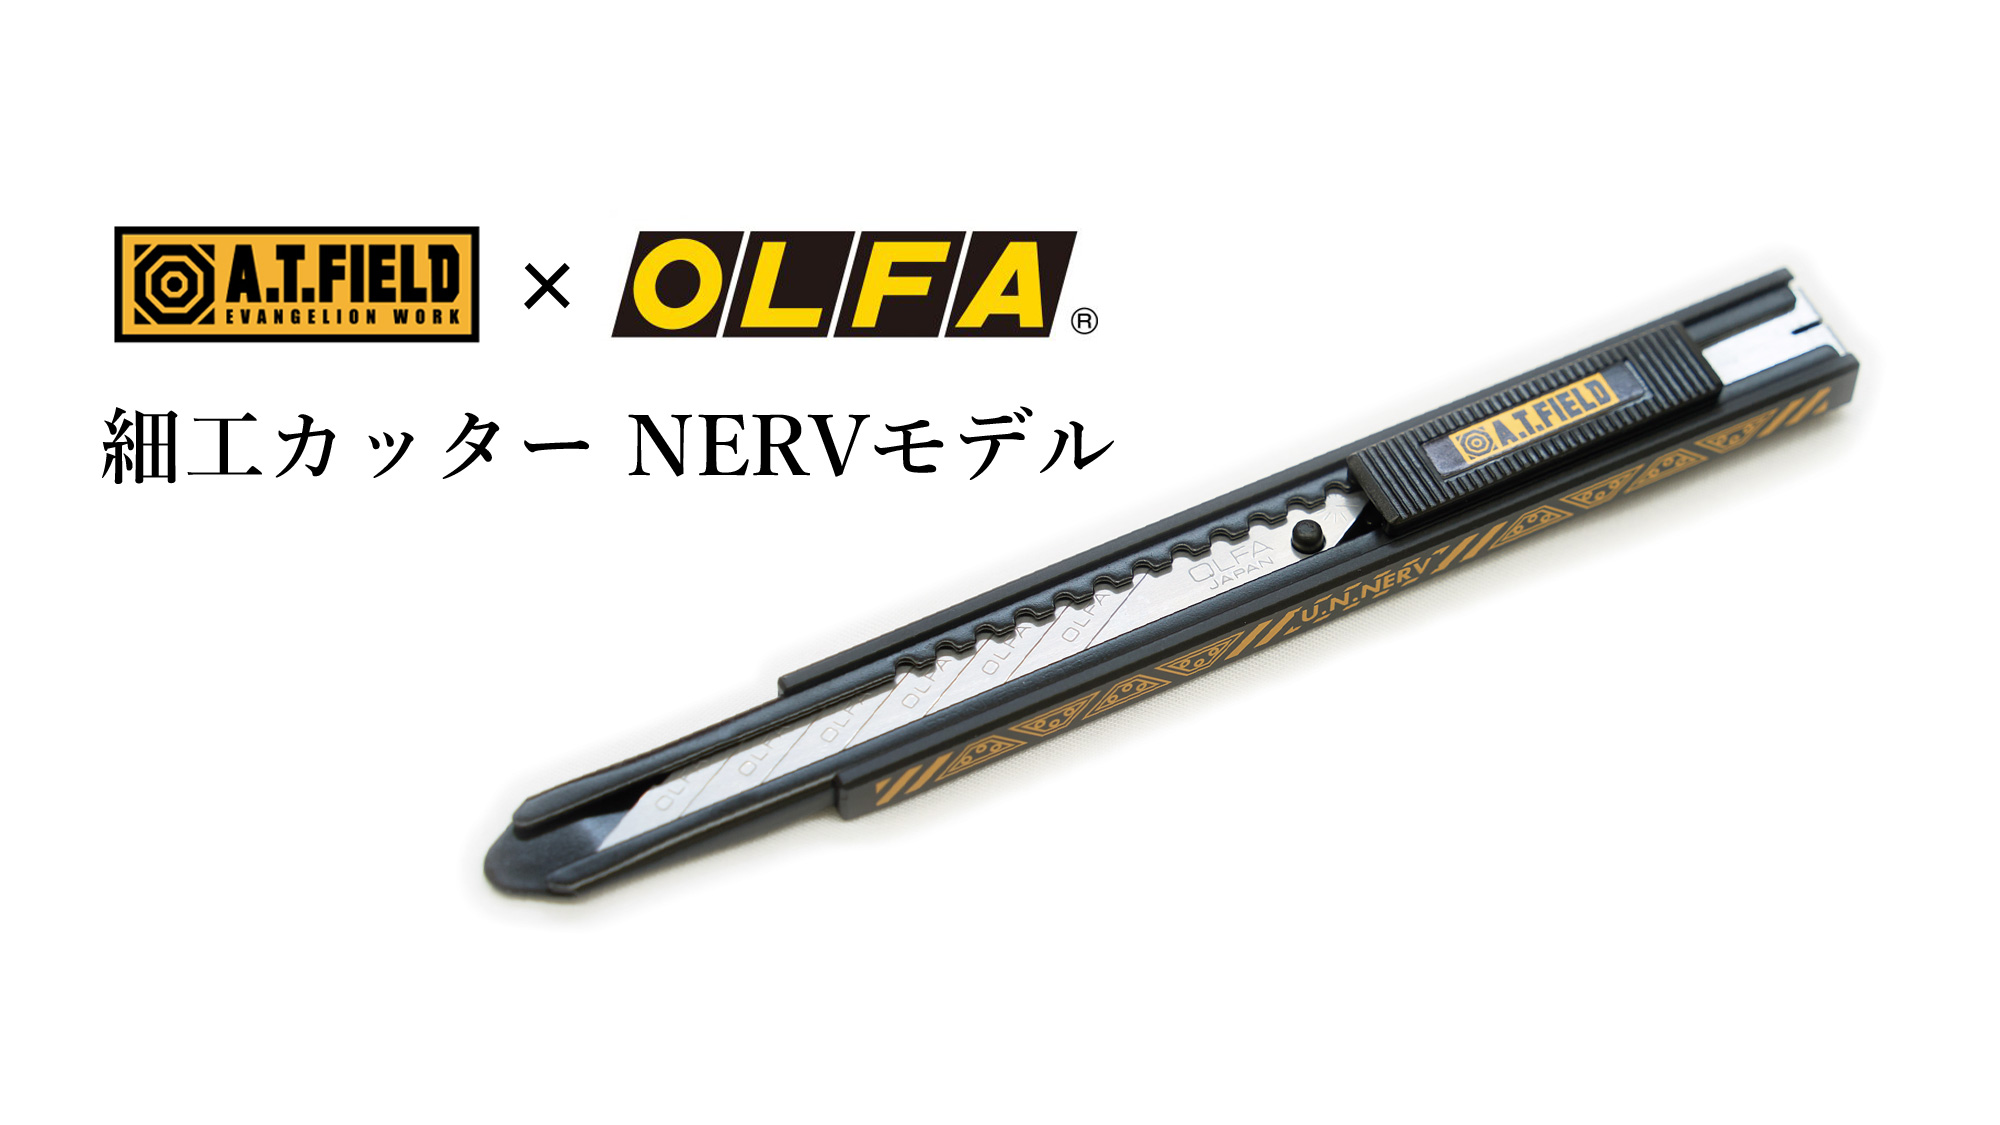 A.T.FIELD 細工カッター NERVモデル ATF-801 | 日光 匠家